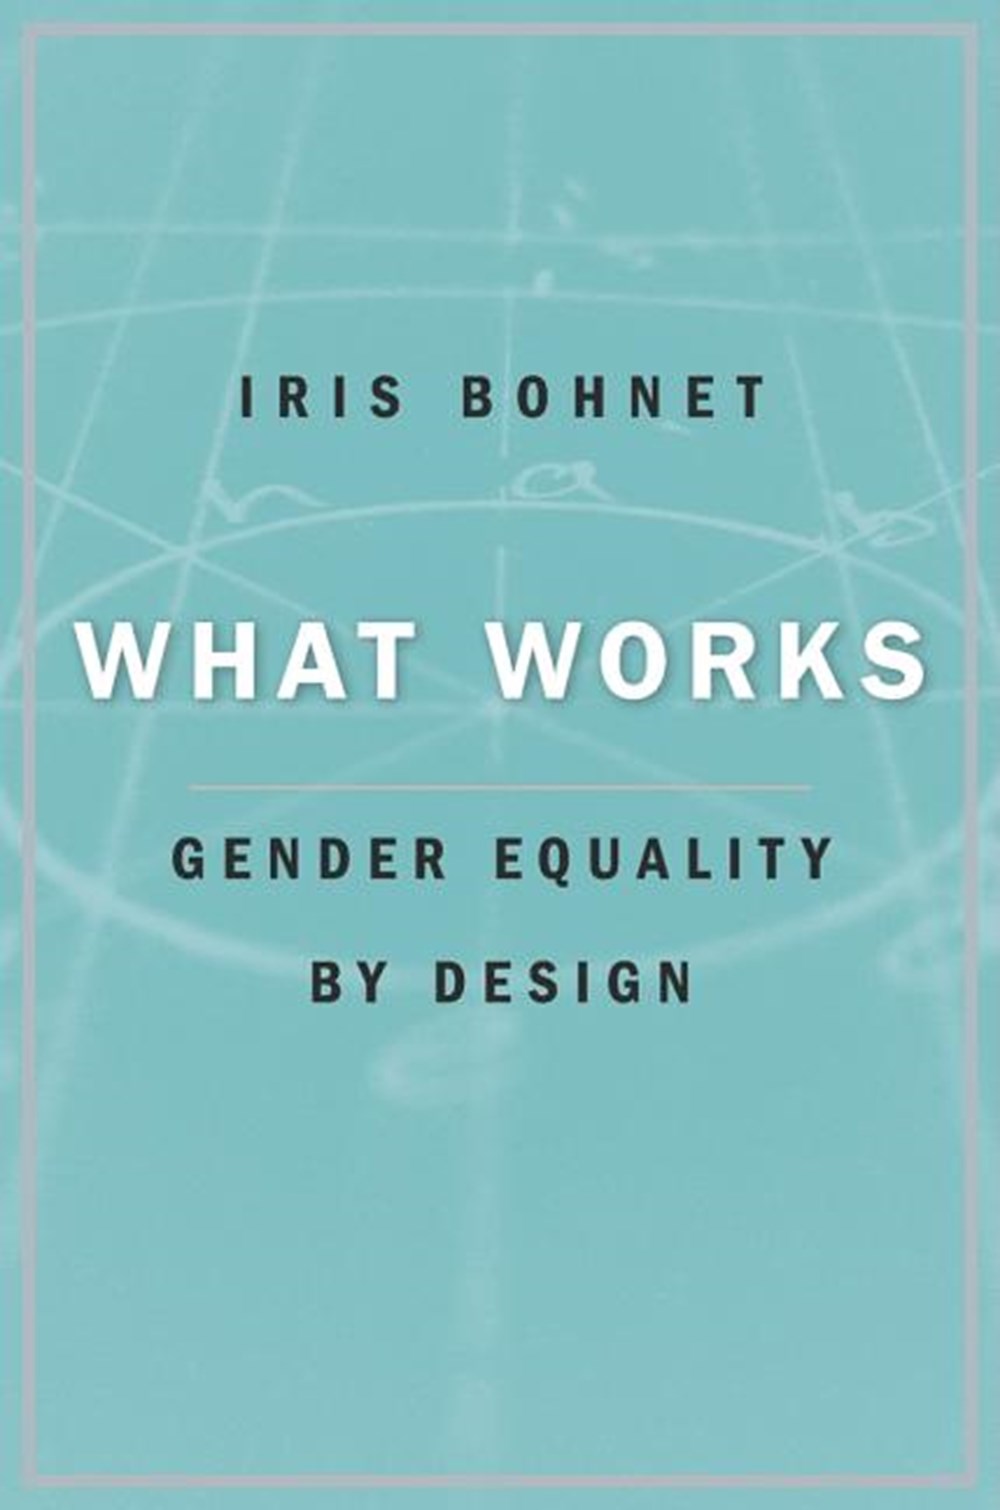 What Works Gender Equality by Design